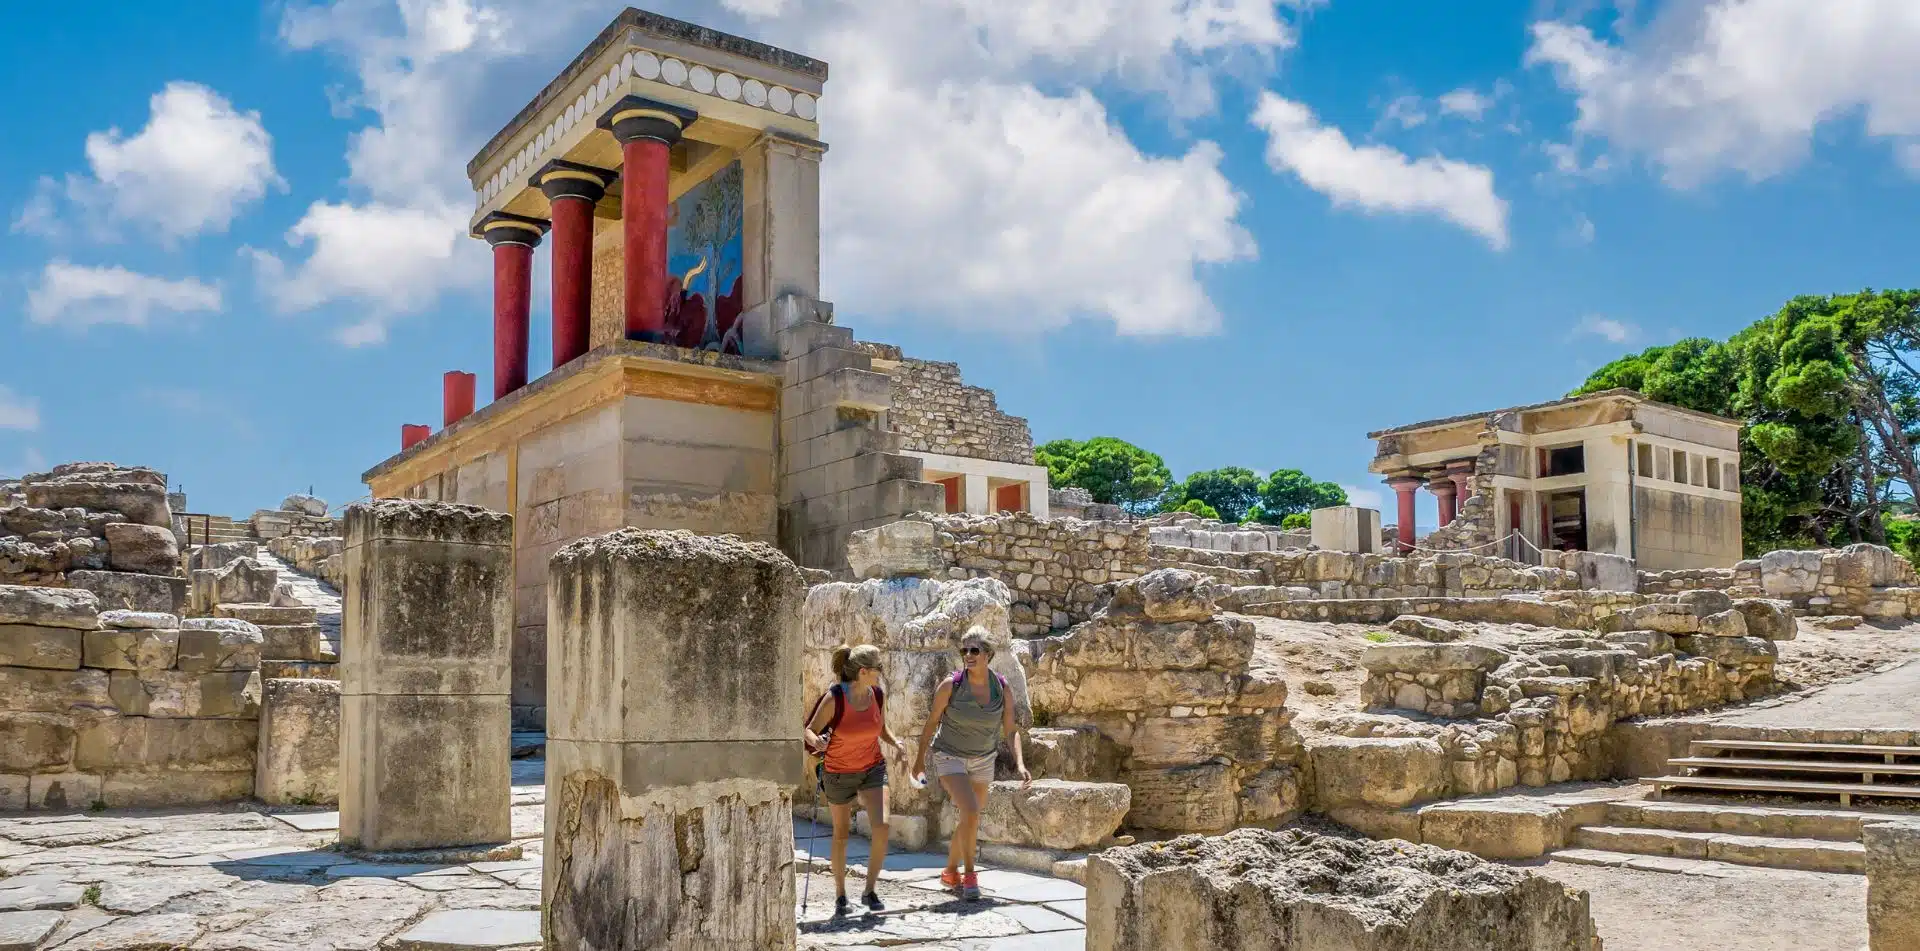 Get up close to the ancient ruins of the Palace of Knossos